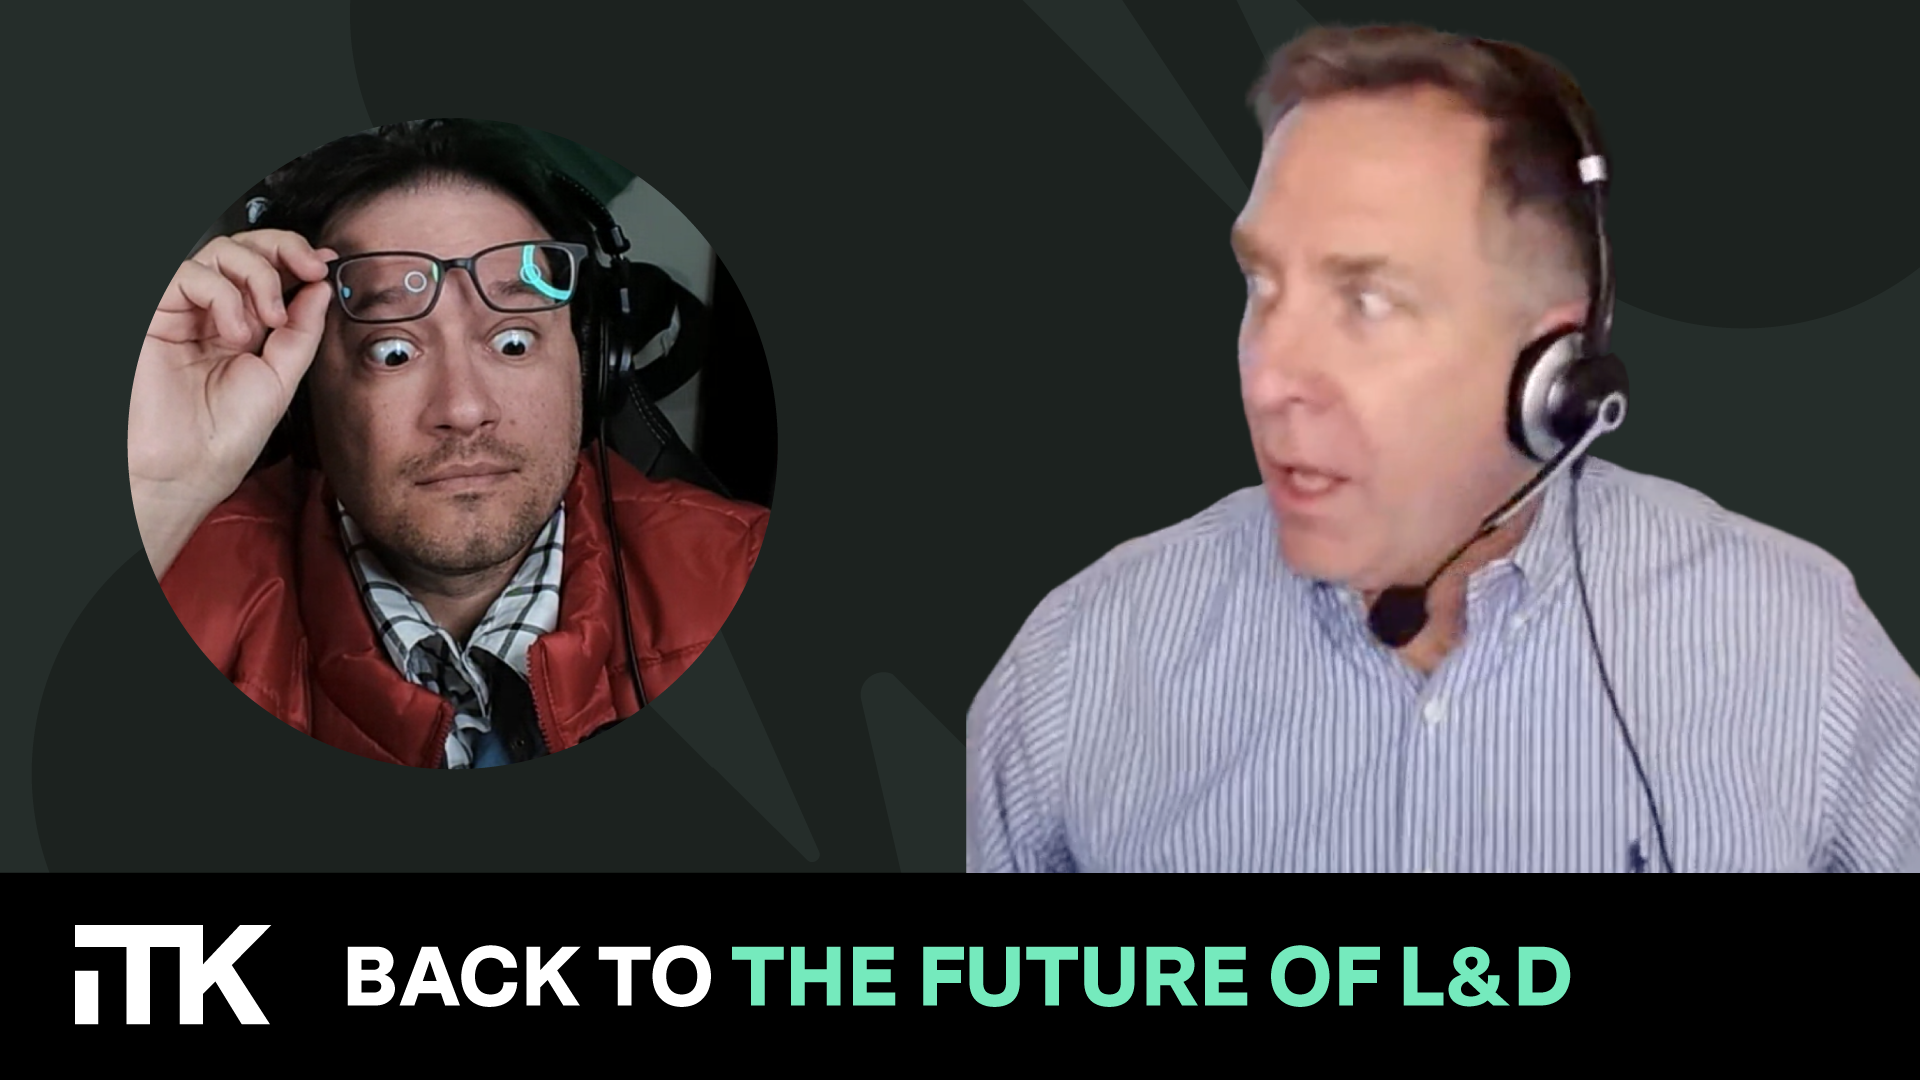 Back to the Future of L&D